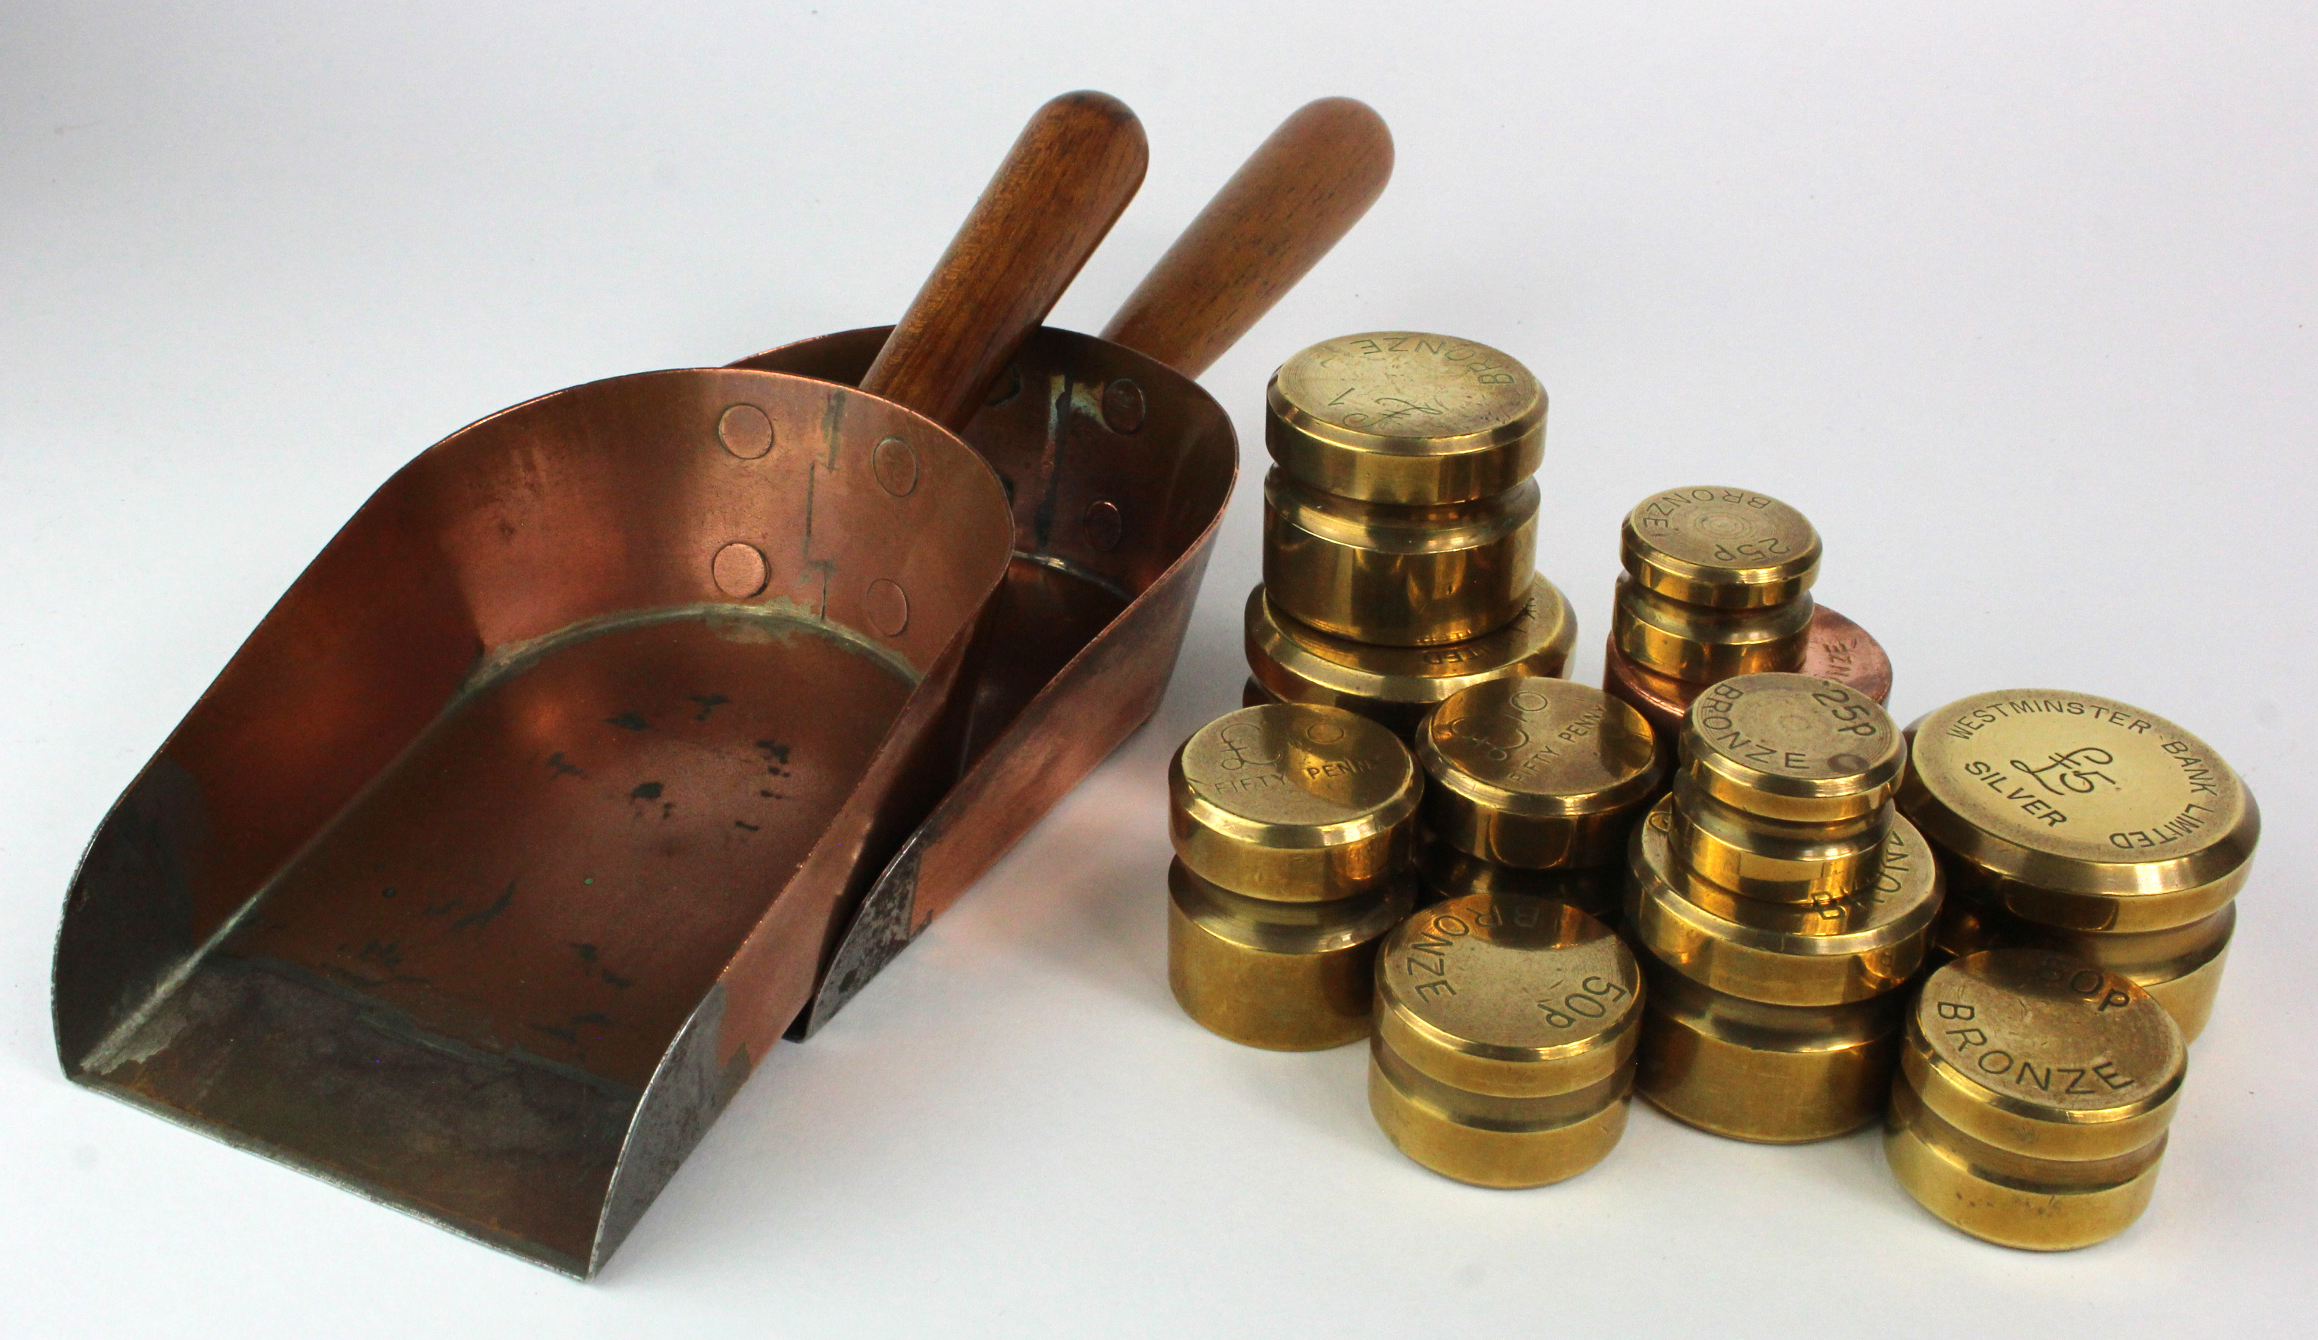 Banking Memorabilia: A quantity of large coin weights and coin shovels.